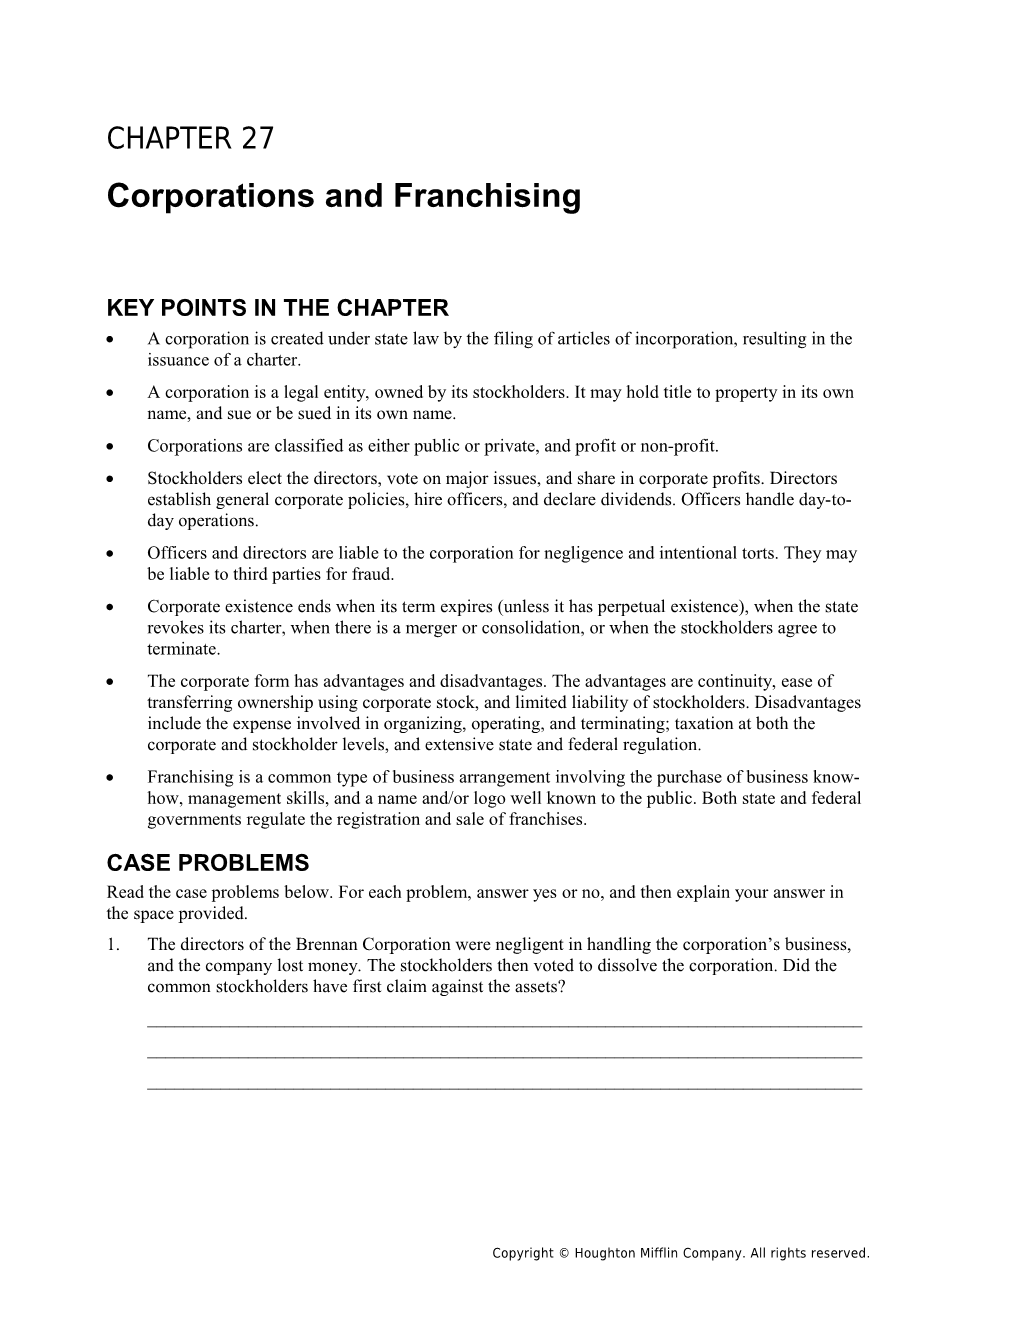 Chapter 27: Corporations and Franchising 171